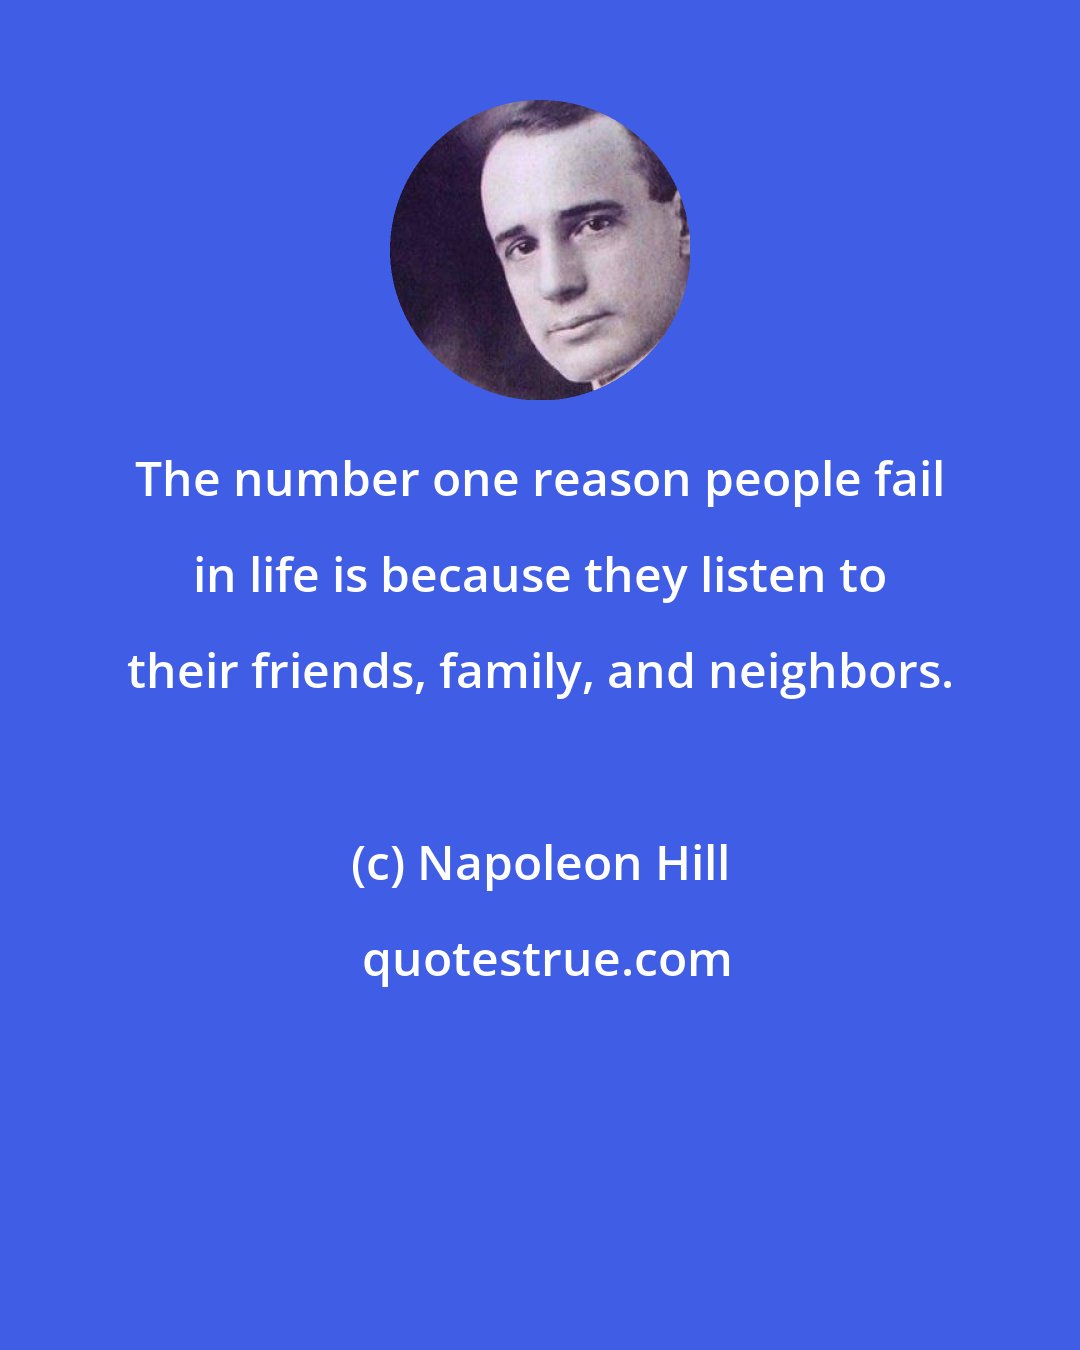 Napoleon Hill: The number one reason people fail in life is because they listen to their friends, family, and neighbors.